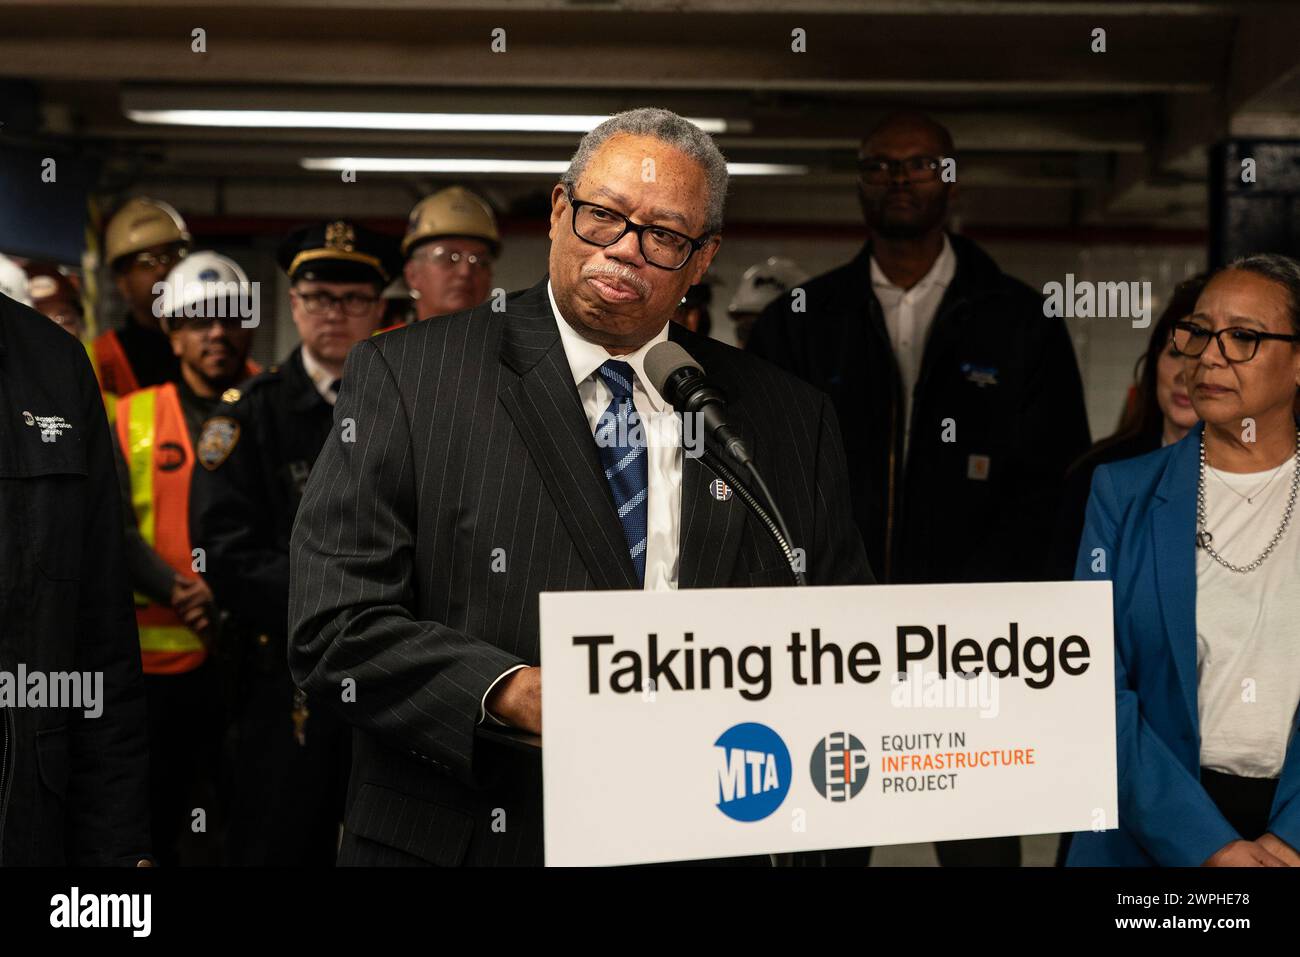 Dorval Carter Jr., Chicago Transit Authority President and Equity in Infrastructure Project Co-Chair speaks during MTA announcement at 14th street subway station in New York. Dorval Carter Jr., Chicago Transit Authority President and Equity in Infrastructure Project Co-Chair, John Porcari, Equity in Infrastructure Project Co-Founder and Former U.S. Deputy Secretary of Transportation, Phillip Washington, Denver International Airport CEO and Equity in Infrastructure Project Chair, Janno Lieber, MTA Chair and CEO signed a pledge to promote minorities and women owned business to receive contracts Stock Photo